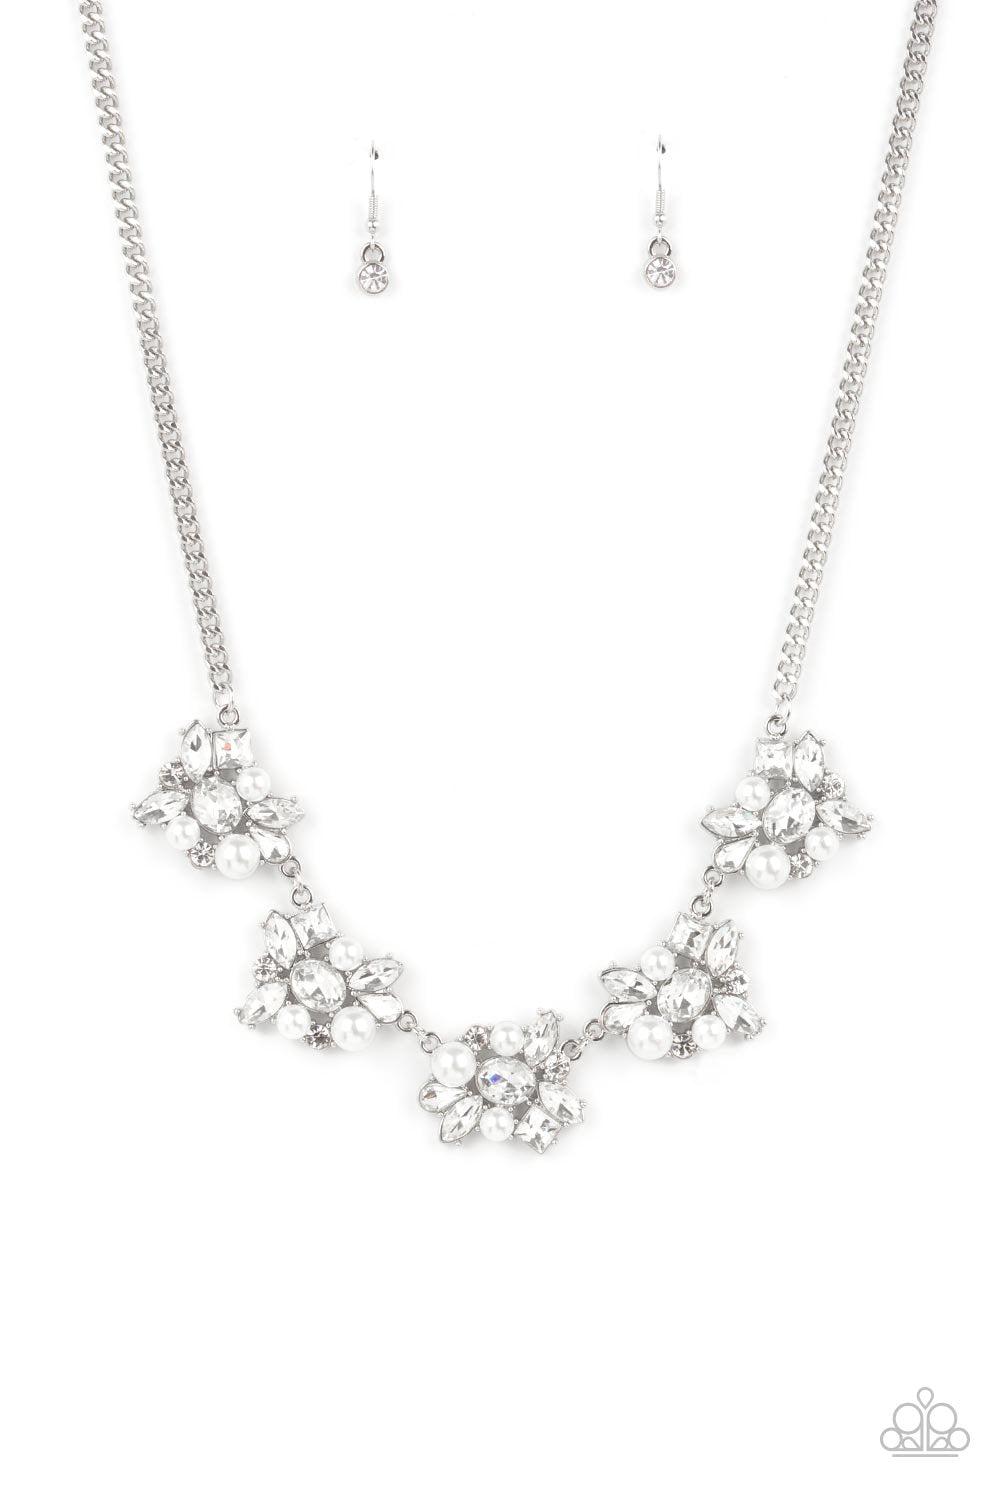 HEIRESS of Them All White Pearl and Rhinestone Necklace - Paparazzi Accessories 2021 EMP Exclusive - lightbox -CarasShop.com - $5 Jewelry by Cara Jewels